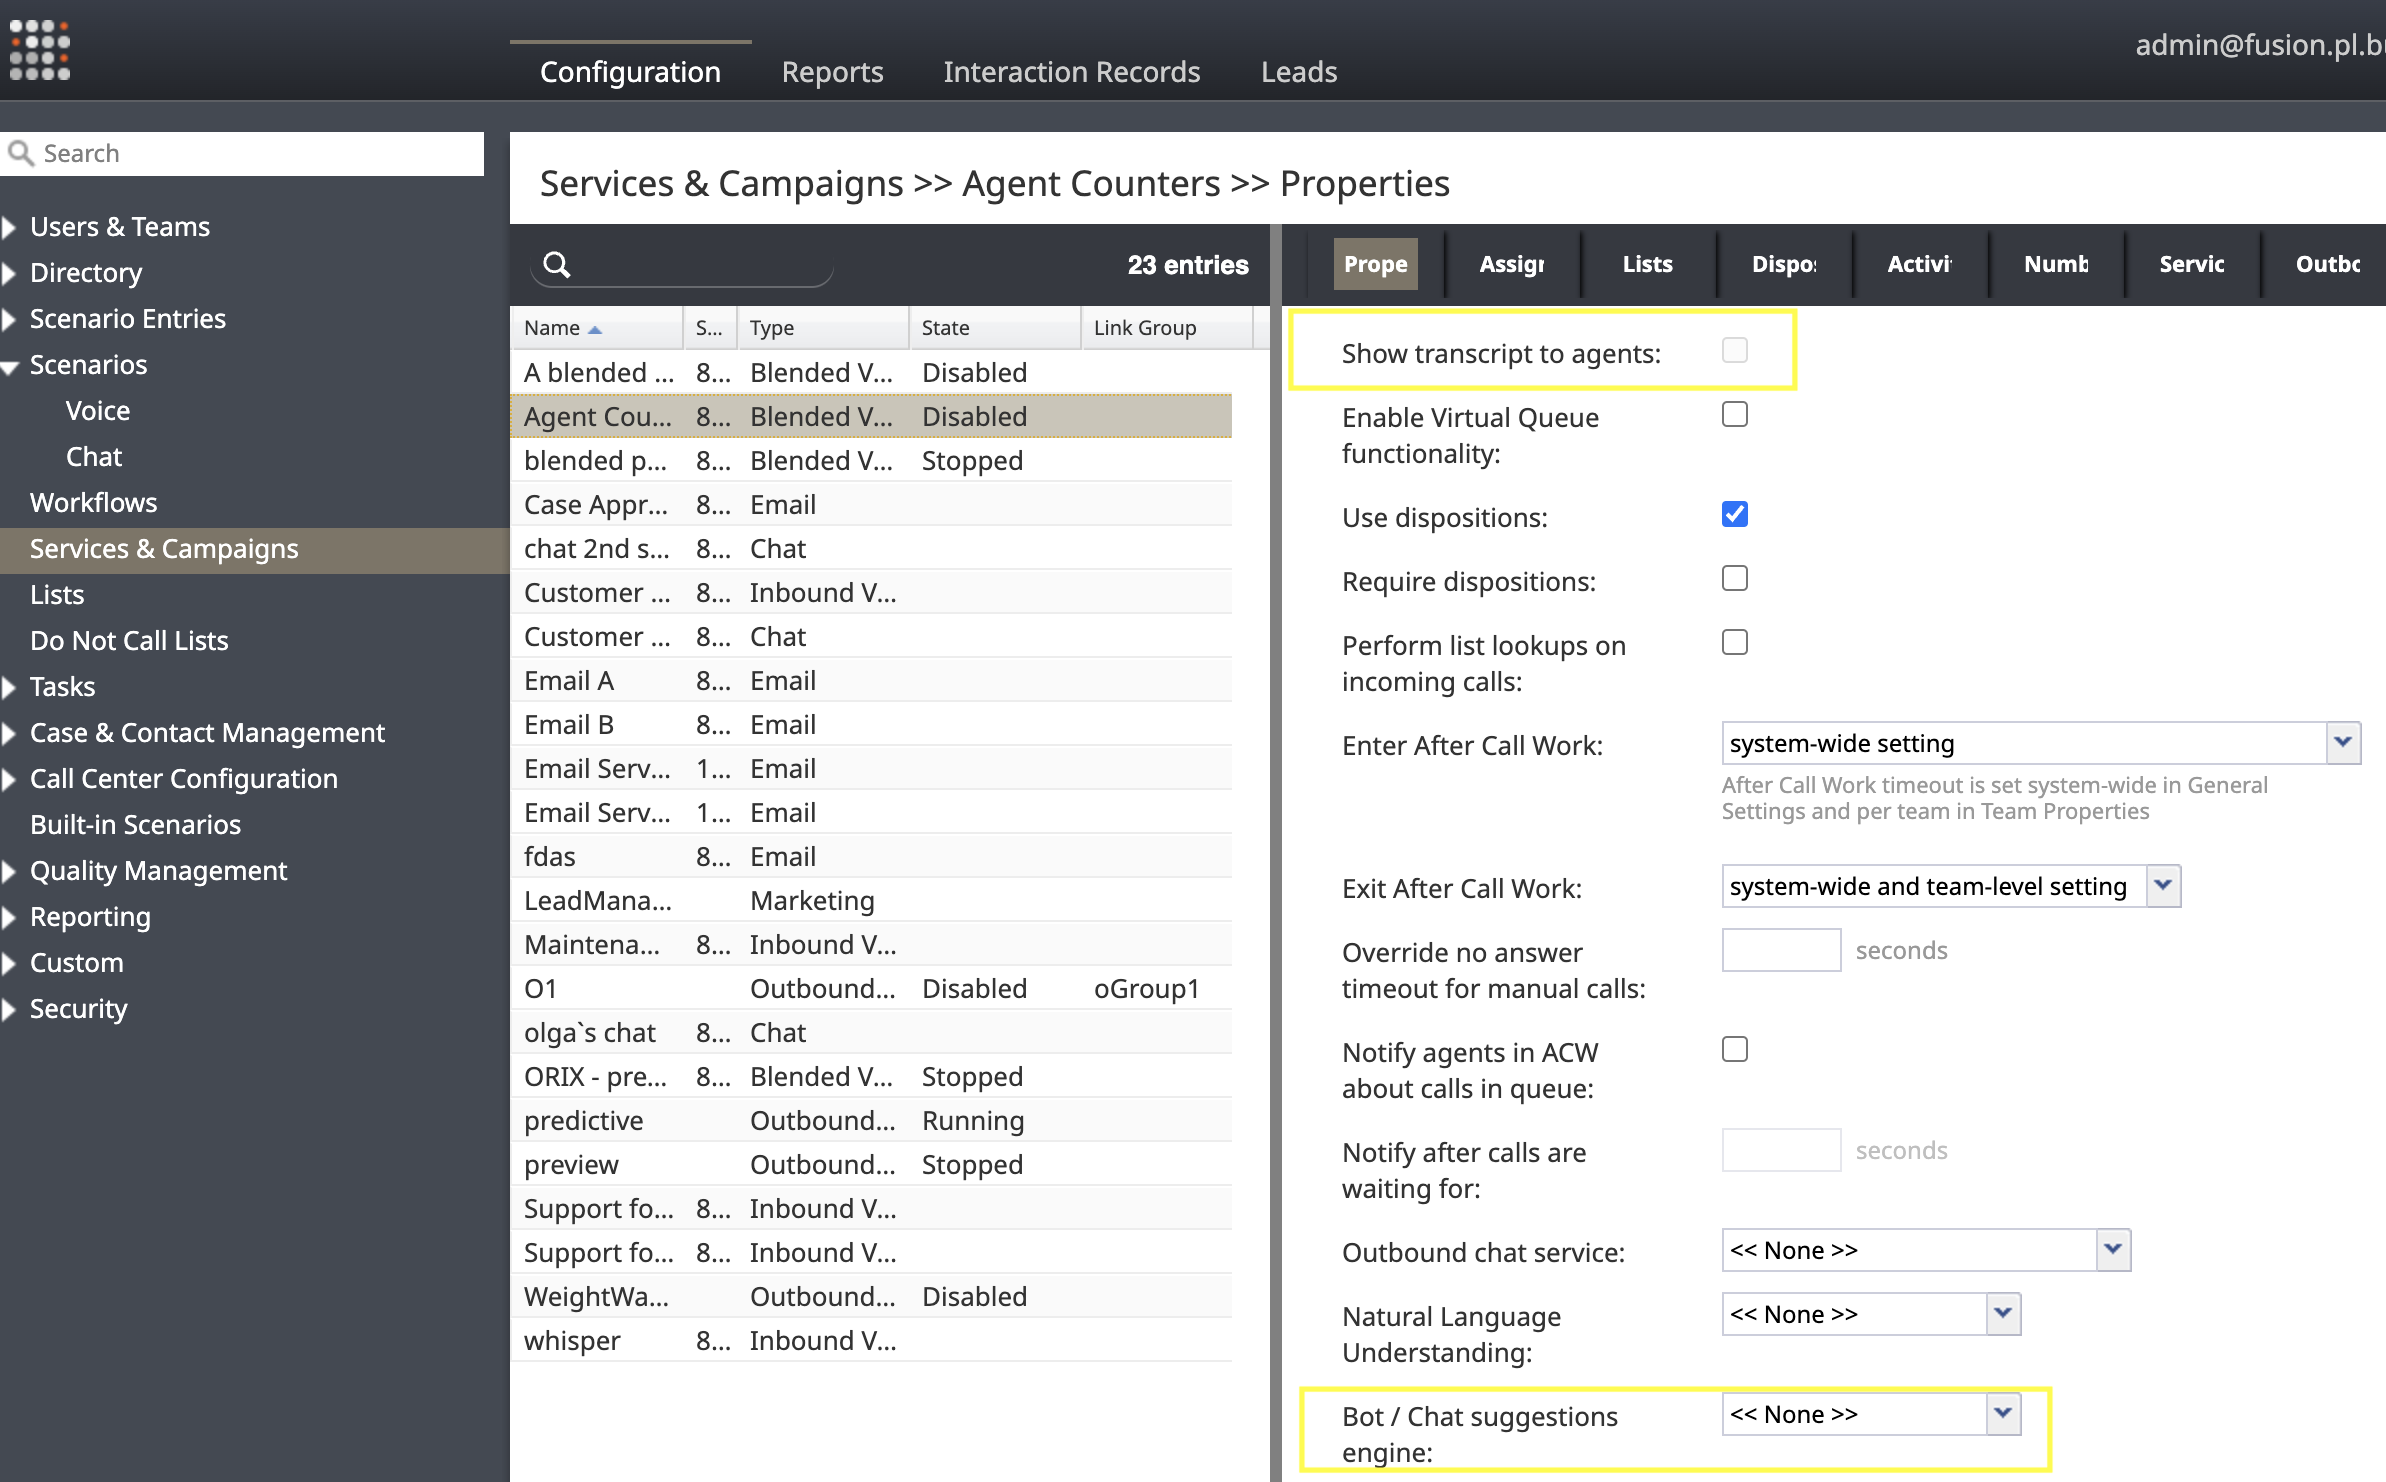 Show transcript to agents and bot/chat suggestions engine are now visible for voice services